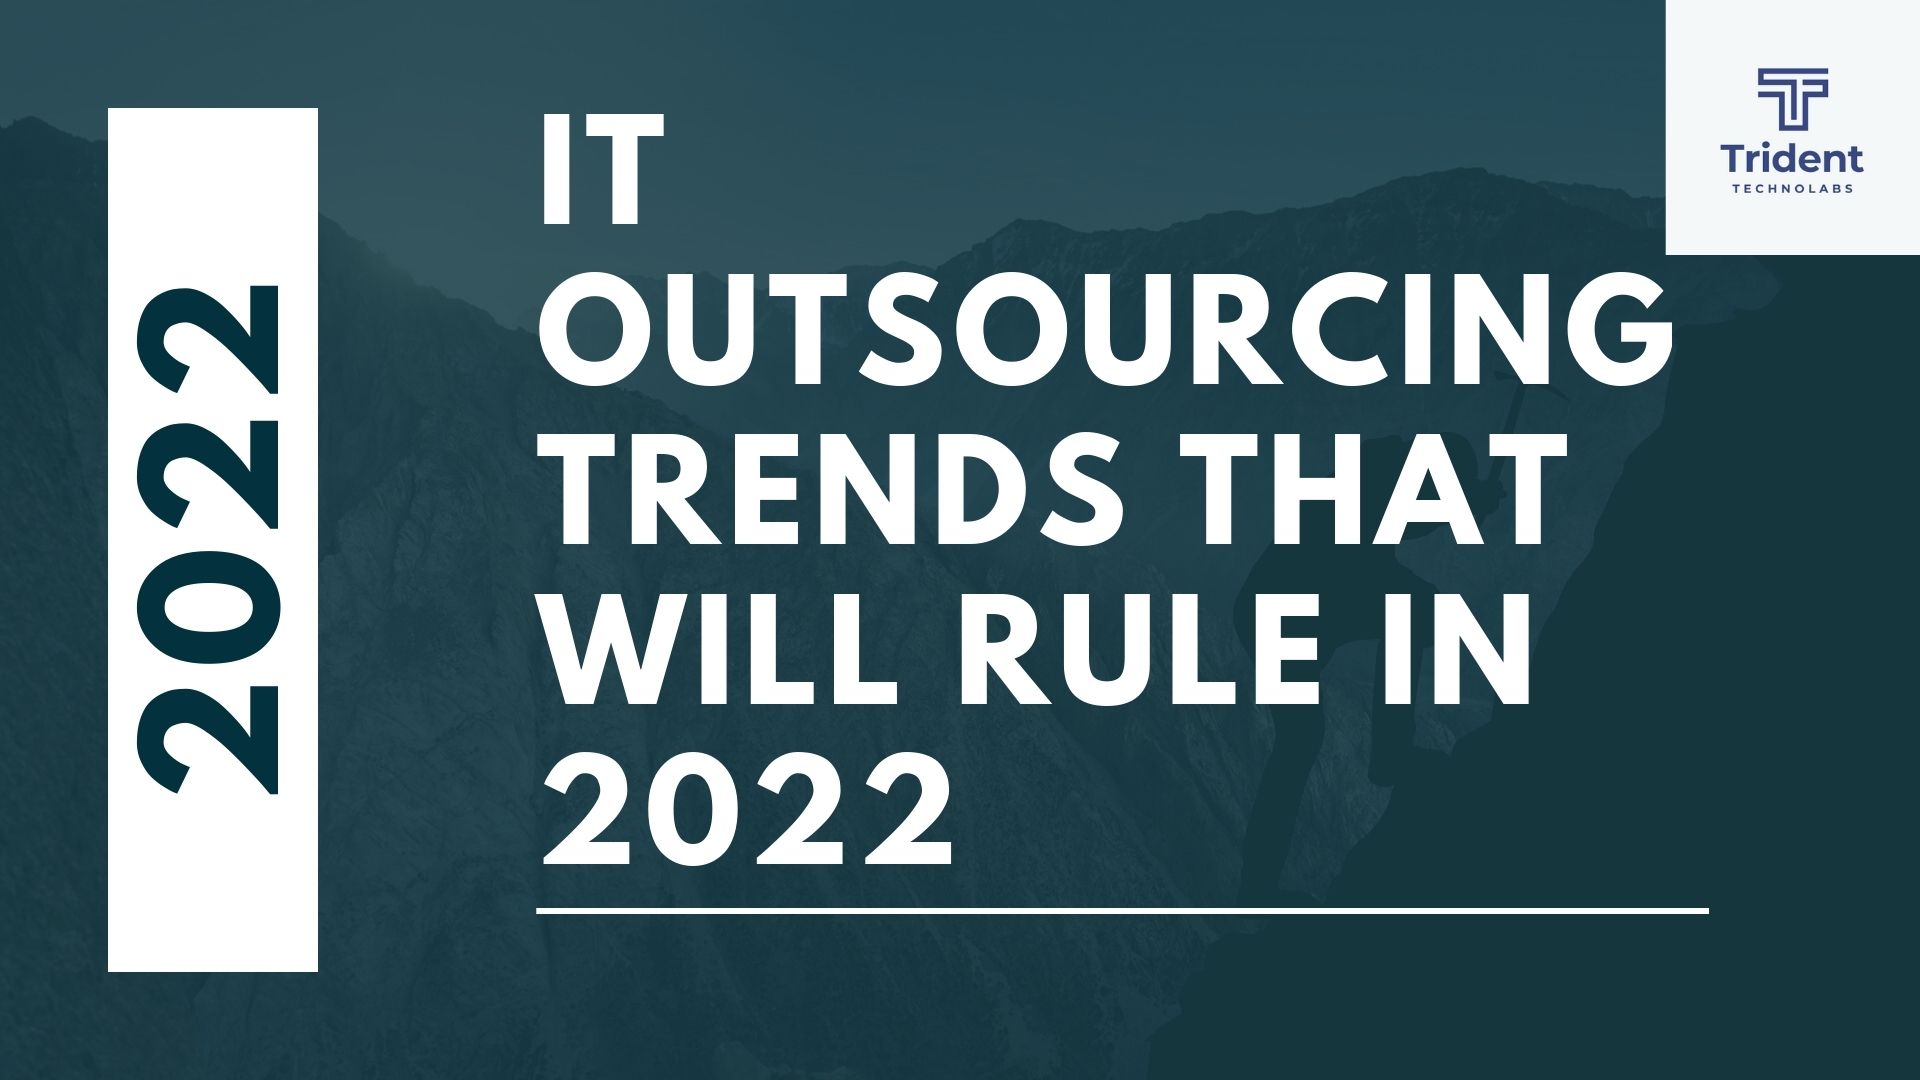 IT Outsourcing trends 2022